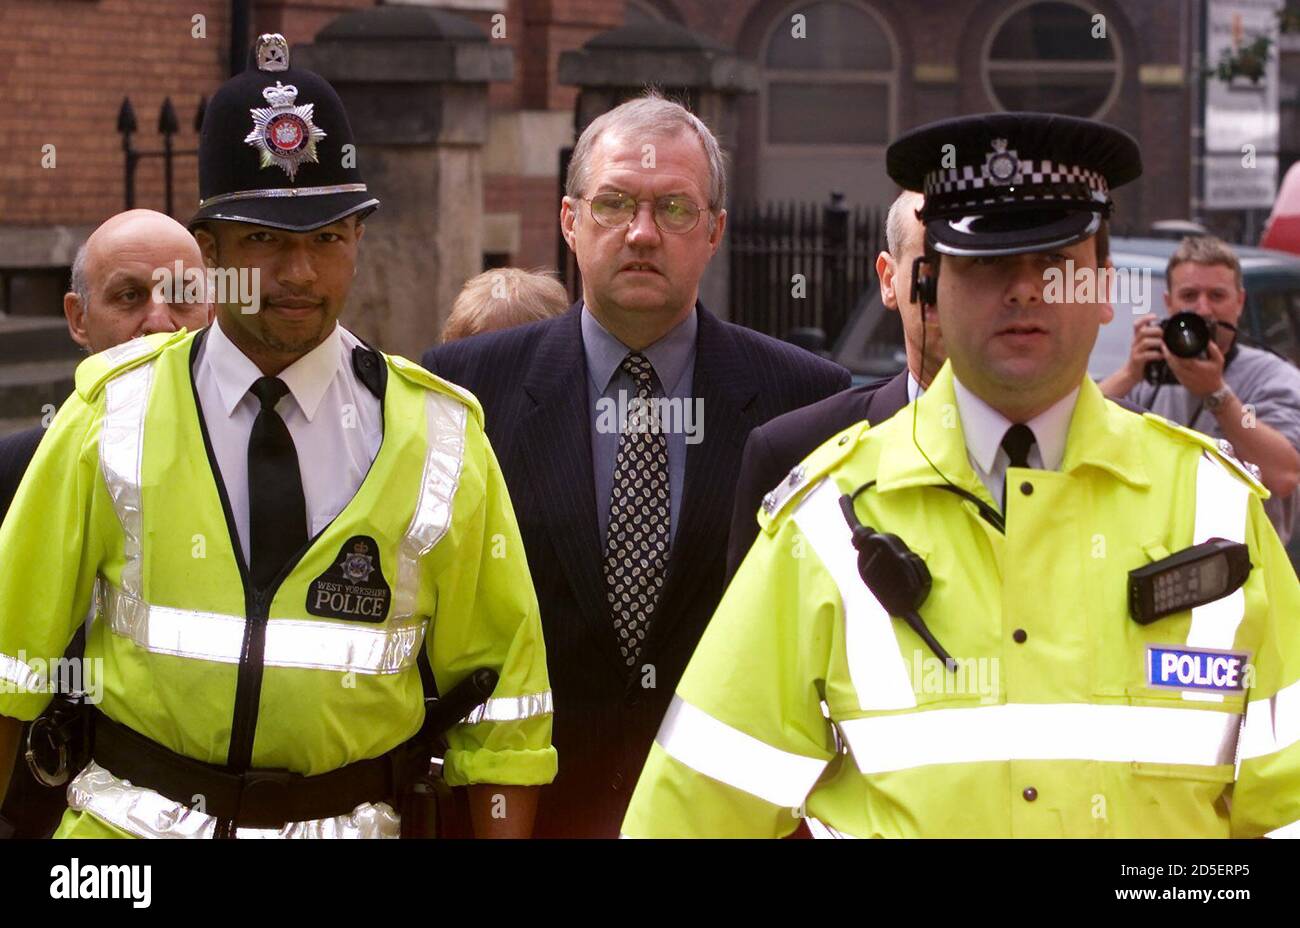 Former South Yorkshire Police Chief Superintendent David Duckinfield arrives at Leeds Crown Court under police escort to hear the judges deliberations after the jury failed to reach a verdict in the case brought by relatives of the victims of the Hillsborough disaster July 26. Duckinfield was charged with manslaughter and wilful neglect of duty in the first criminal proceedings to follow the Hillsborough tragedy in which 96 Liverpool soccer fans were crushed to death at the 1989 FA Cup Semi final. Former South Yorkshire Police Superintendent Bernard Murray who was also accused was acquitted of Stock Photo